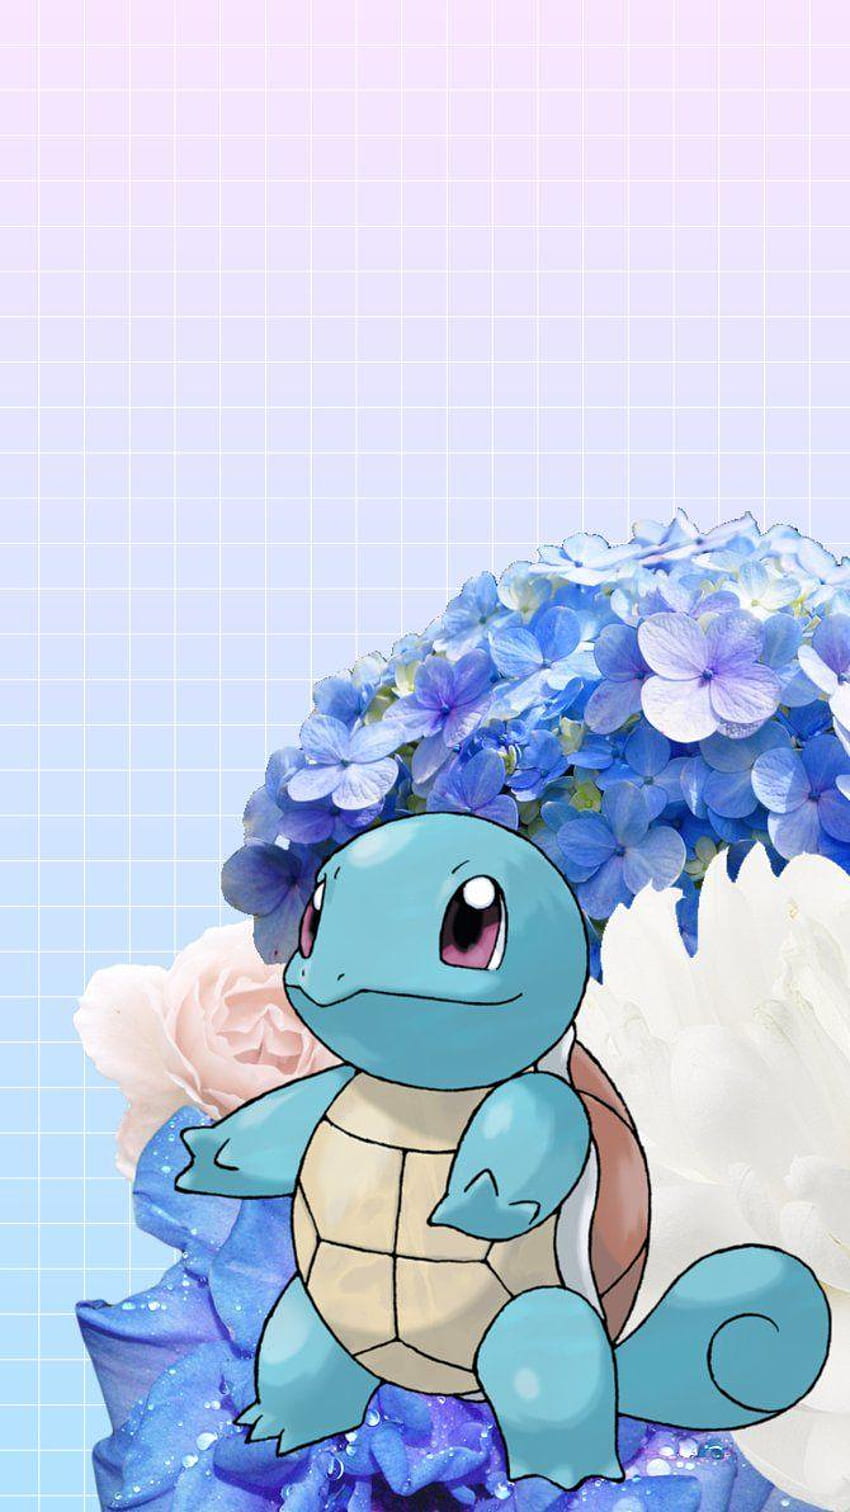 Squirtle Wallpaper by 4rcanine on DeviantArt